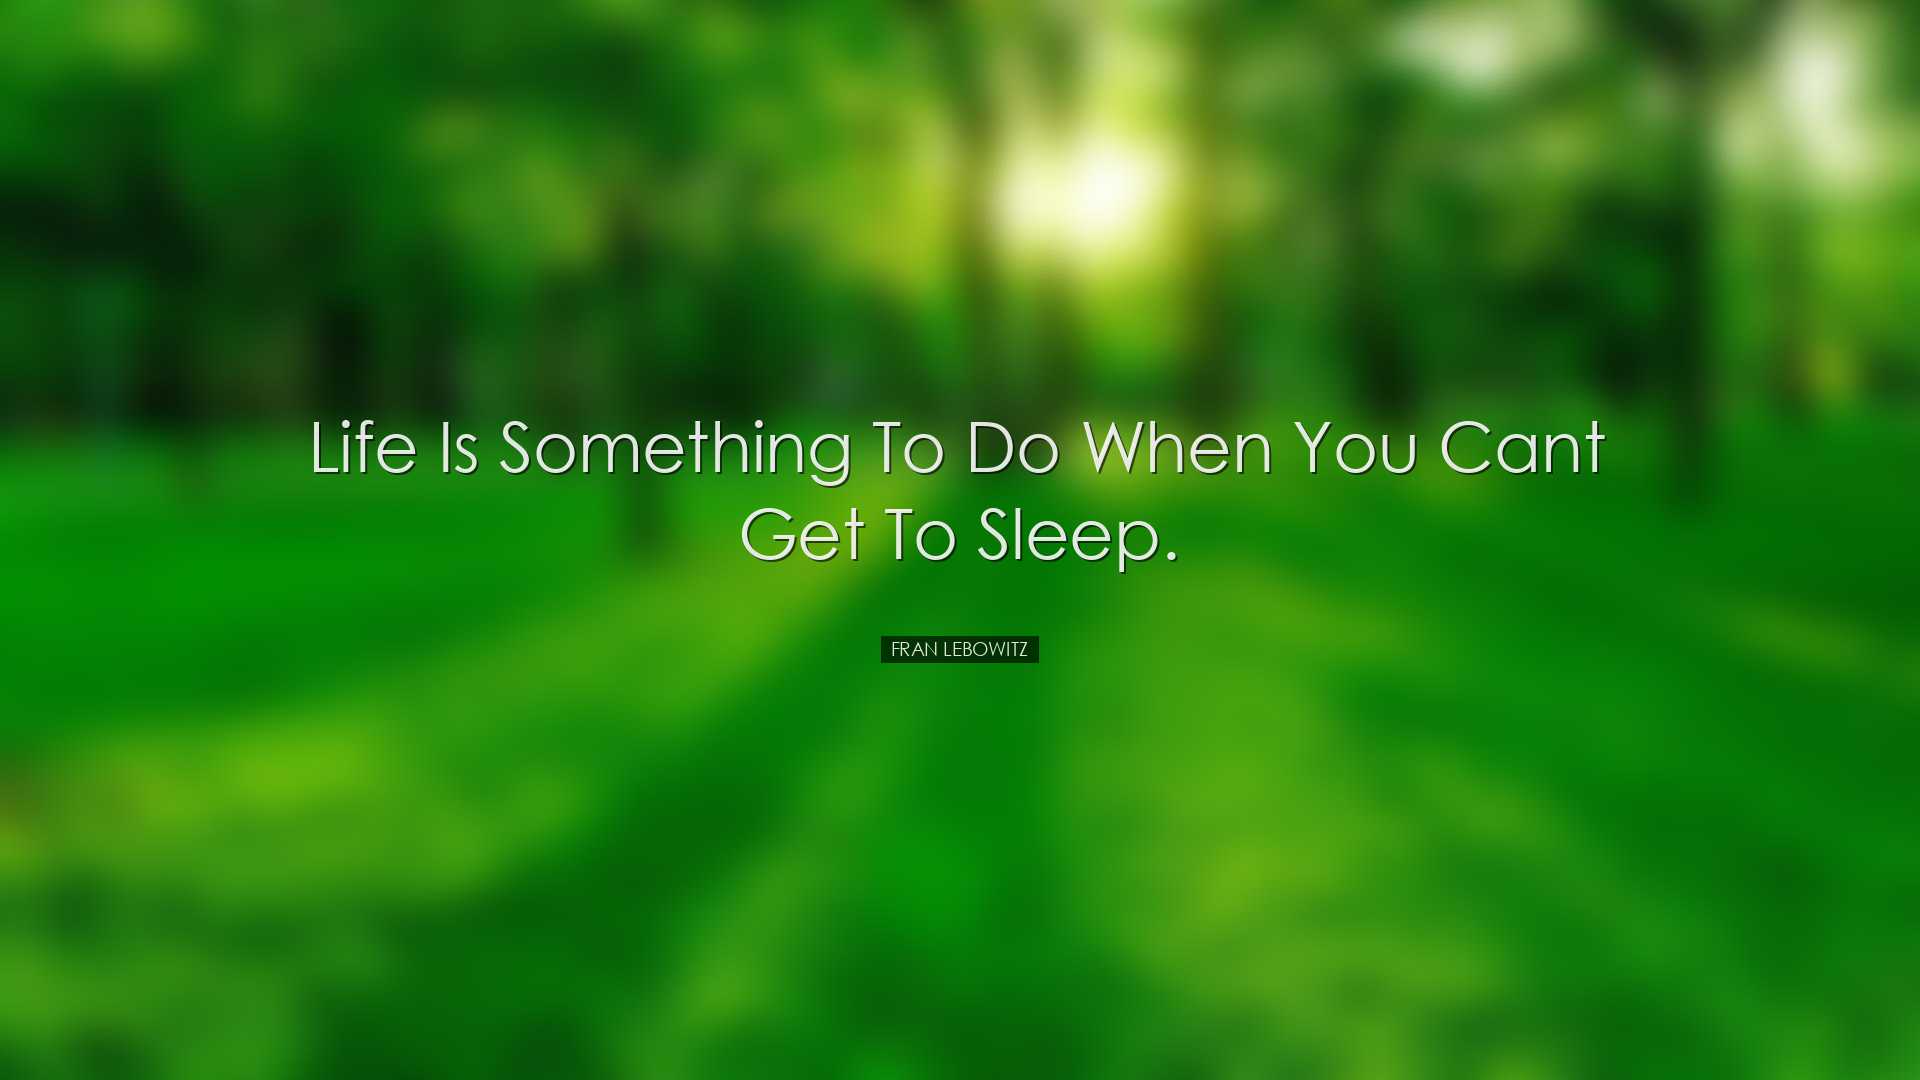 Life is something to do when you cant get to sleep. - Fran Lebowit